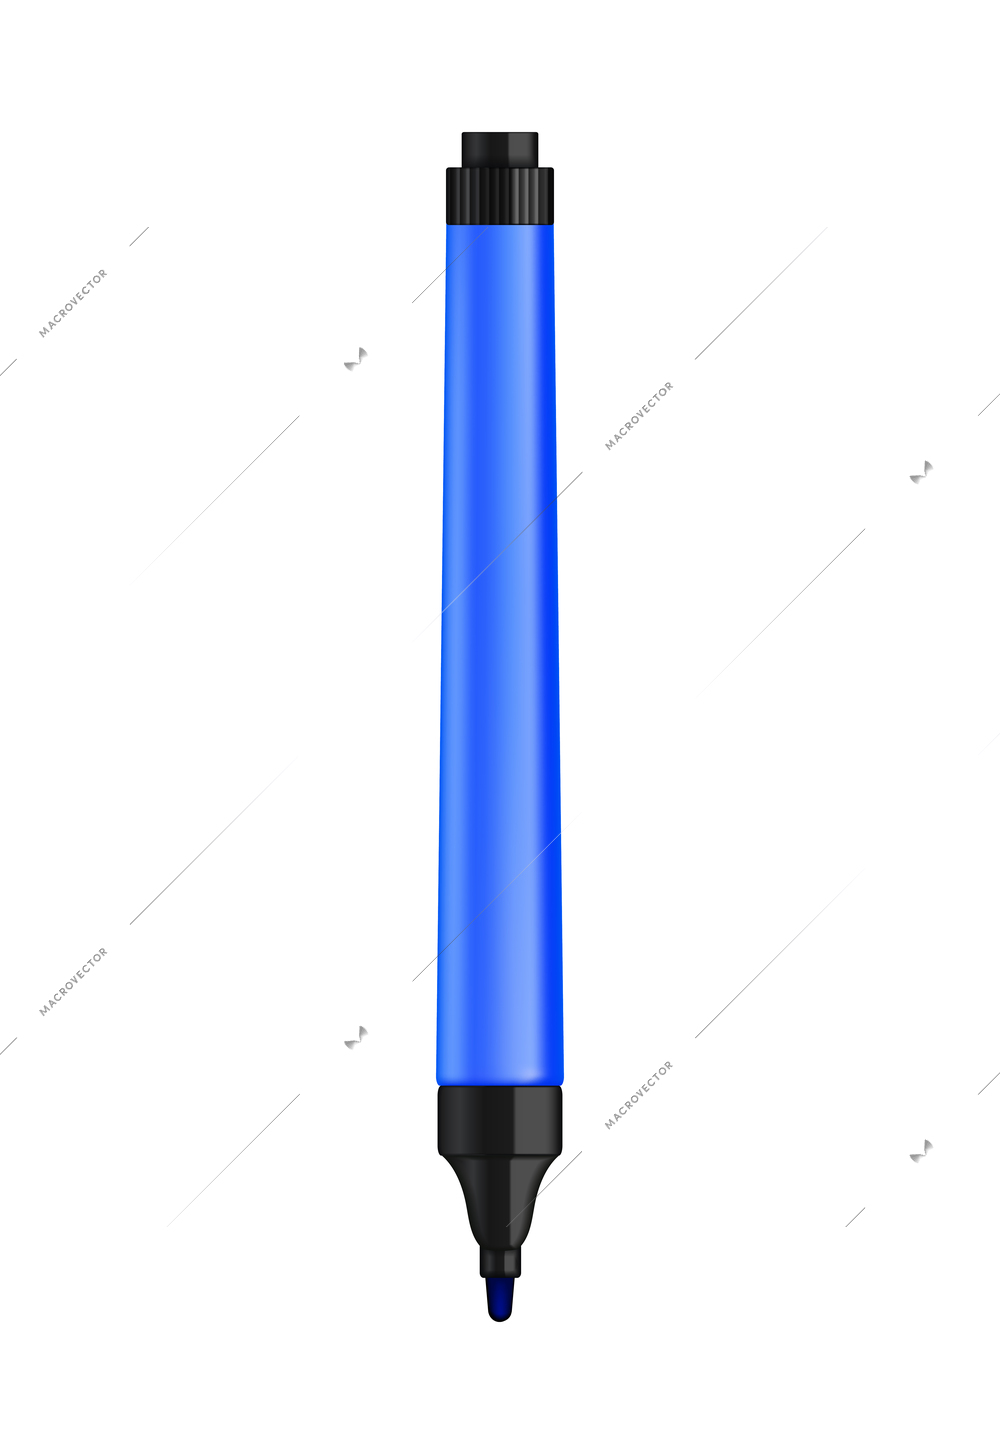 Stationery realistic composition with isolated image of black mark pen on blank background vector illustration